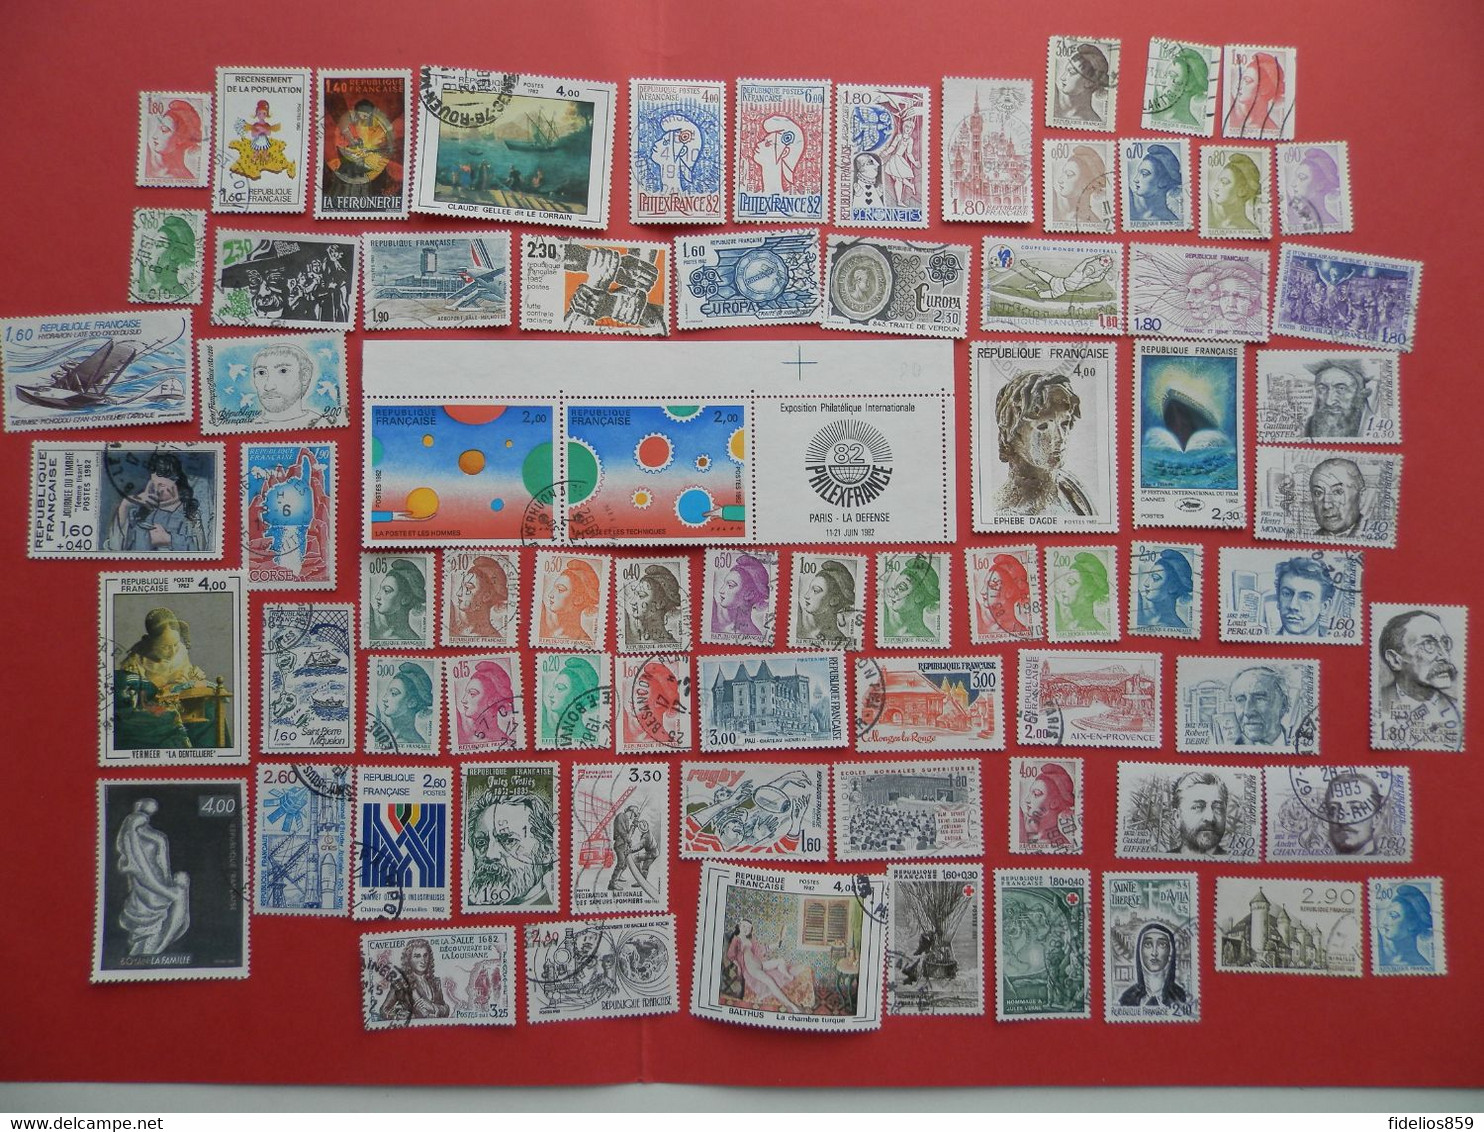 FRANCE OBLITERES : ANNEE COMPLETE 1982 SOIT 74 TIMBRES POSTE DIFFERENTS 1ER CHOIX - 1980-1989